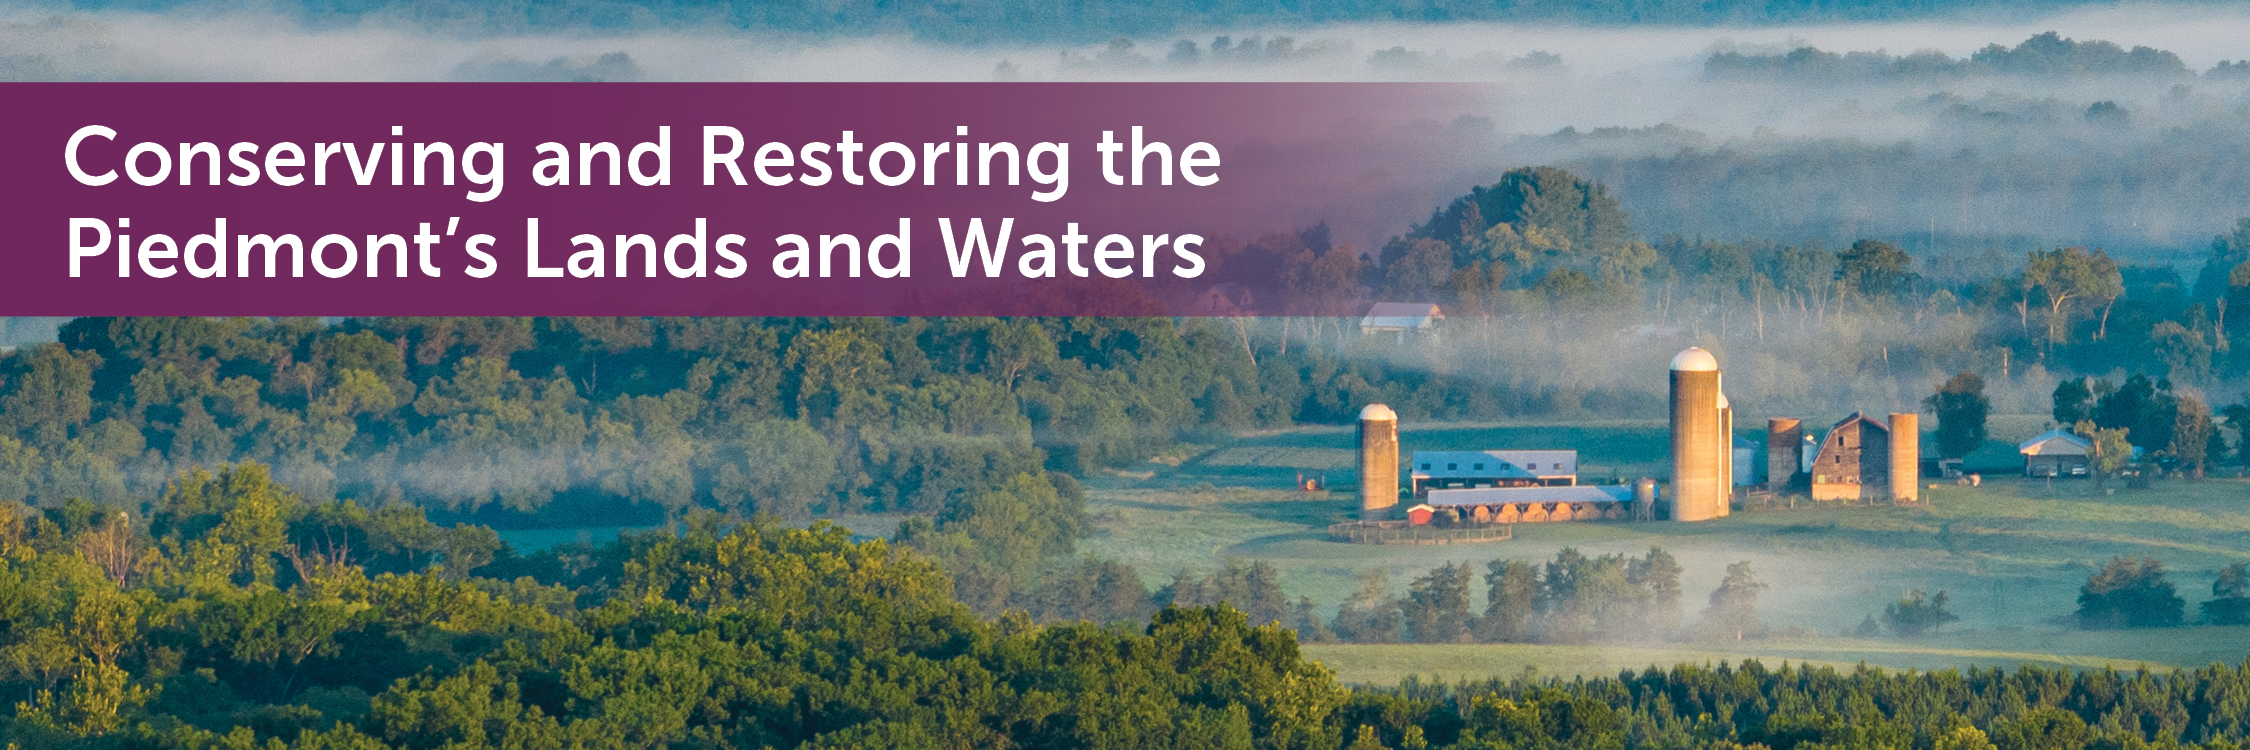 Conserving and Restoring the Piedmont’s Lands and Waters